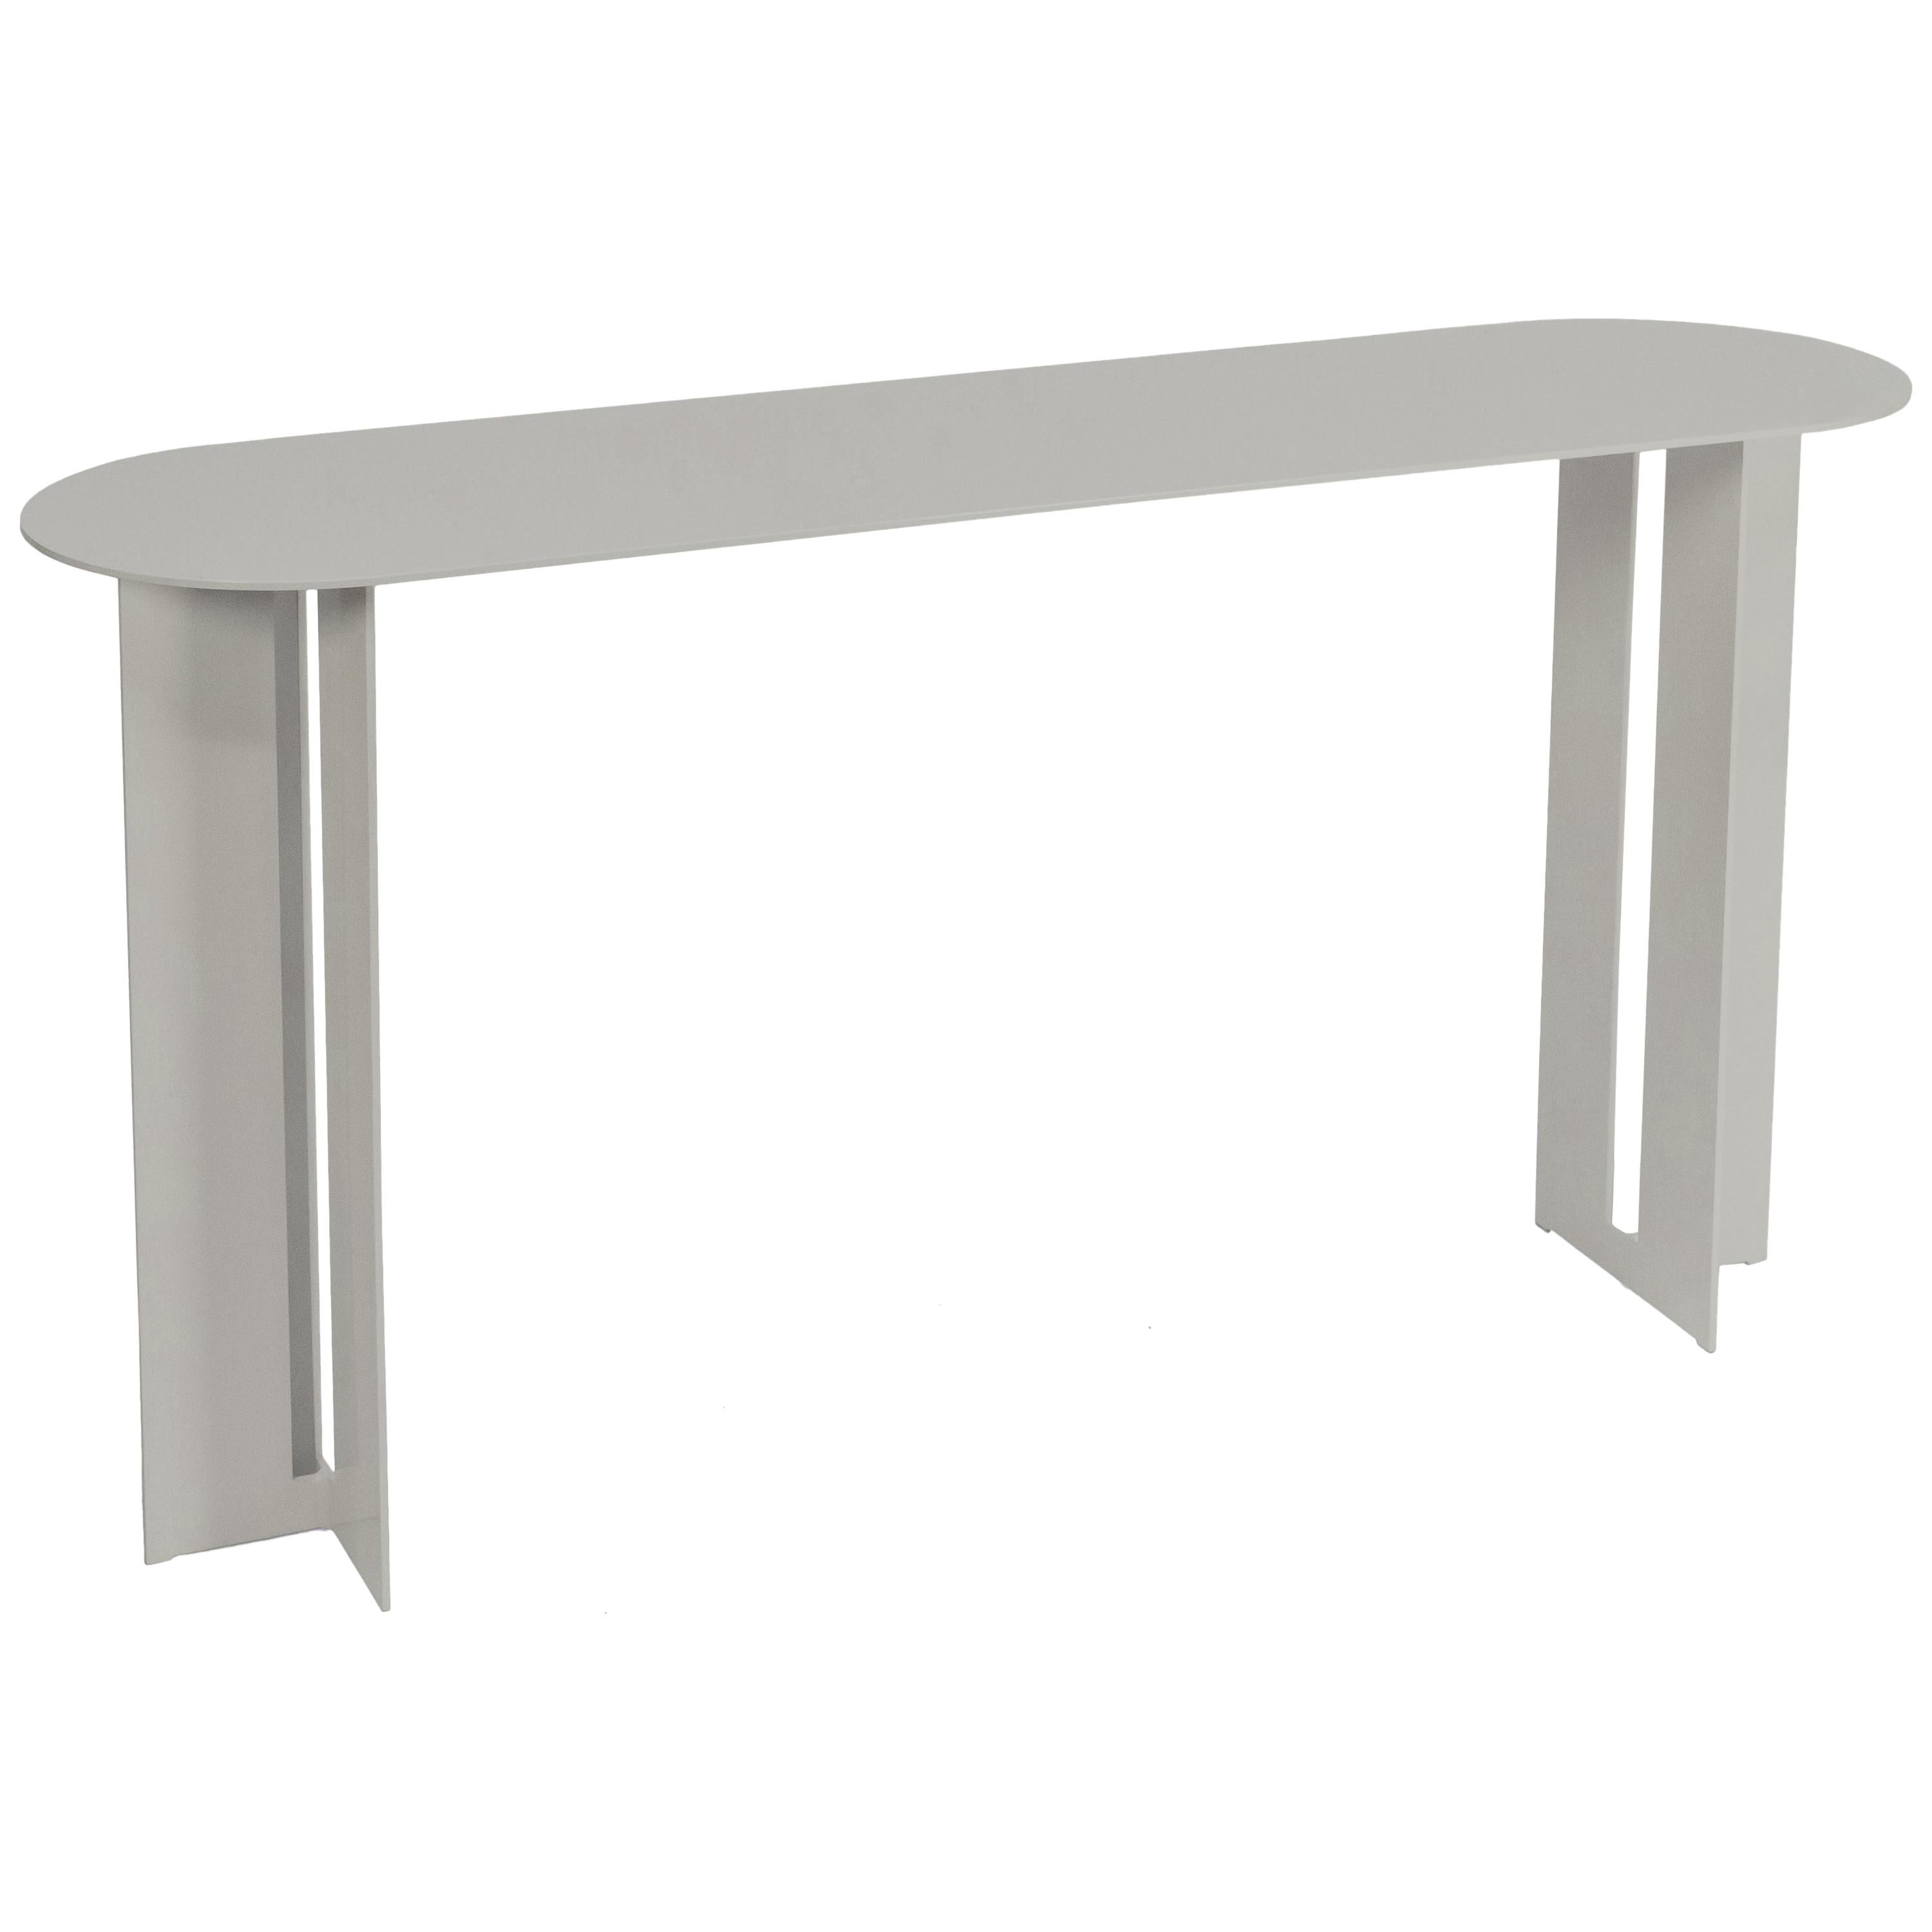 Mers Console Table in Aluminum Satin